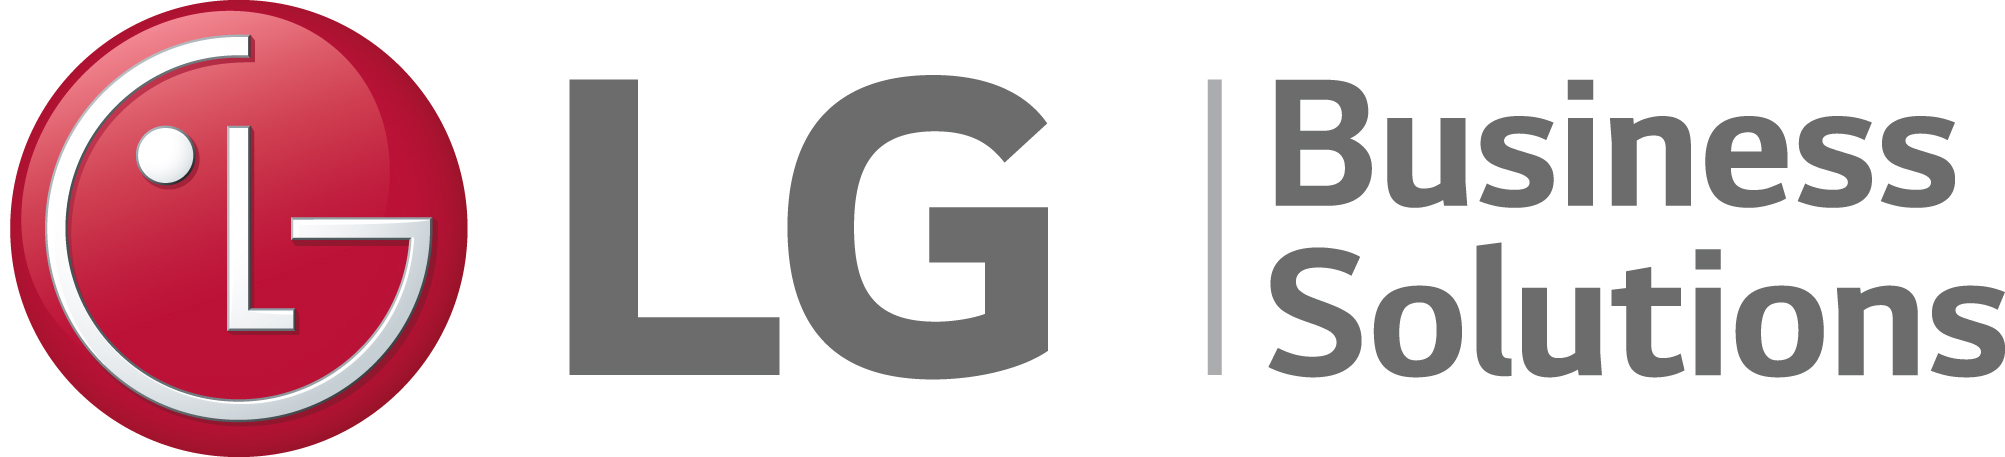 LG Business Solutions logo 1